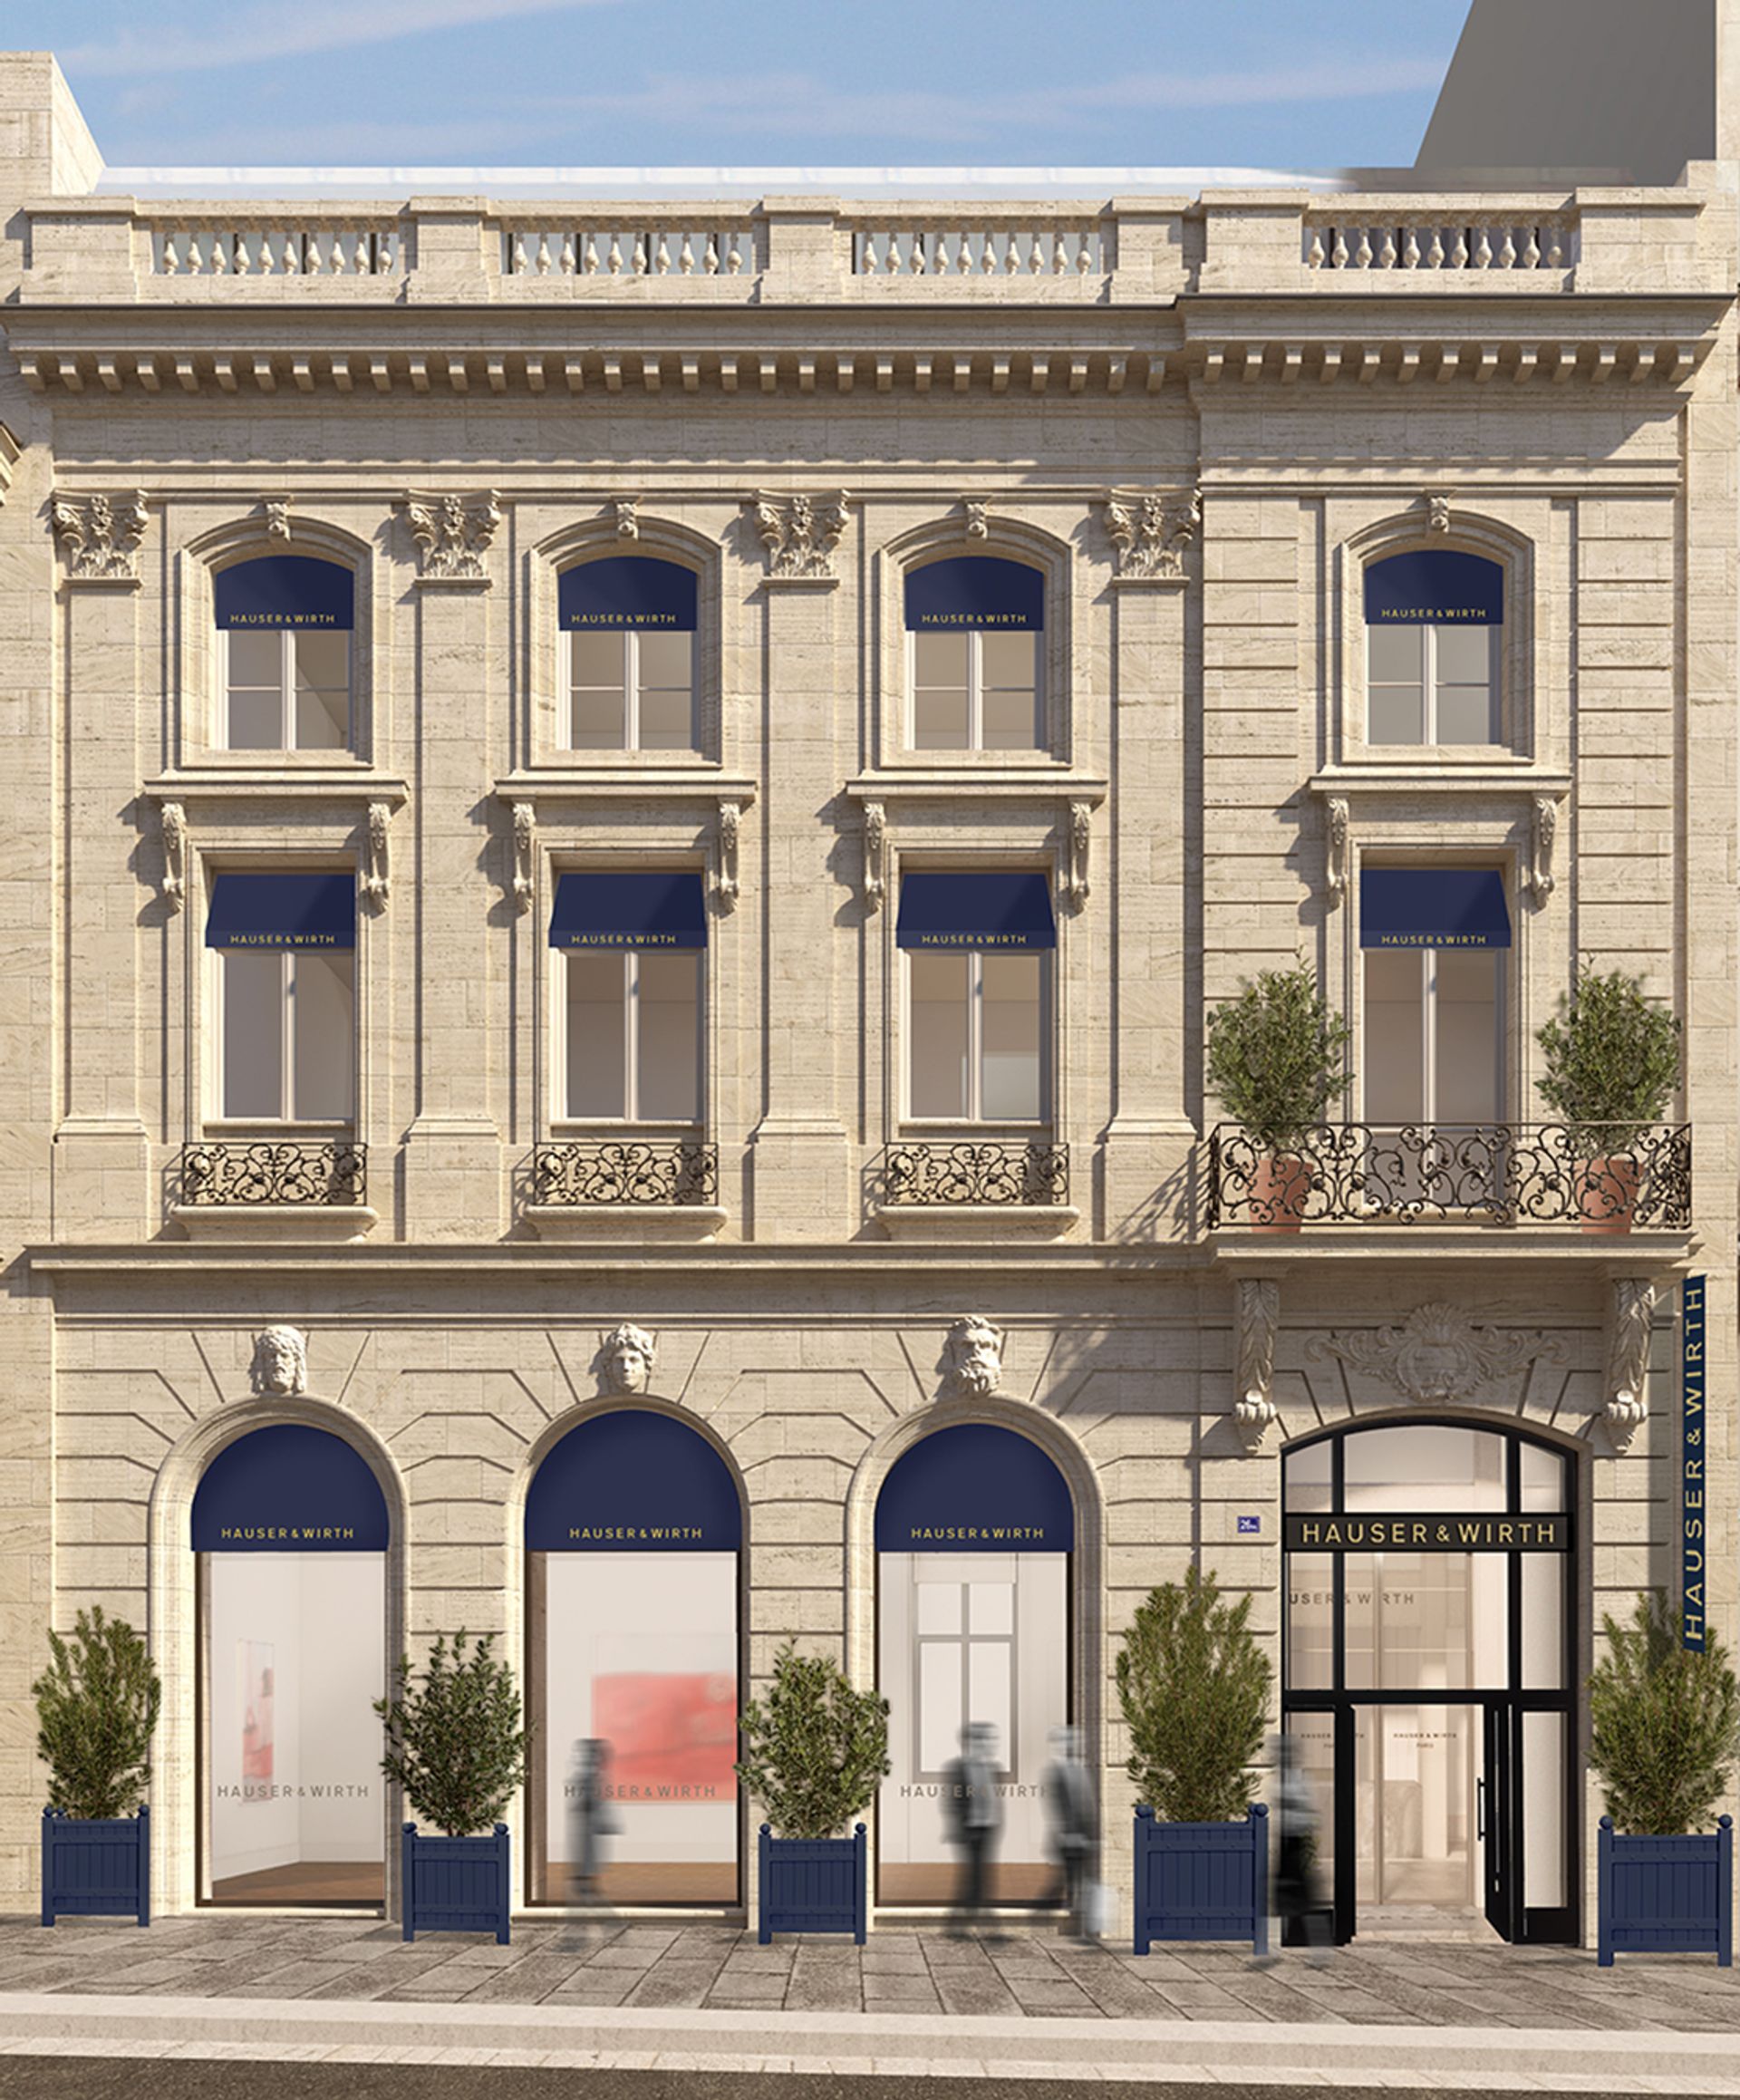 Rendering of the facade of Hauser & Wirth Paris at 26 bis rue François 1er. Courtesy of Hauser & Wirth